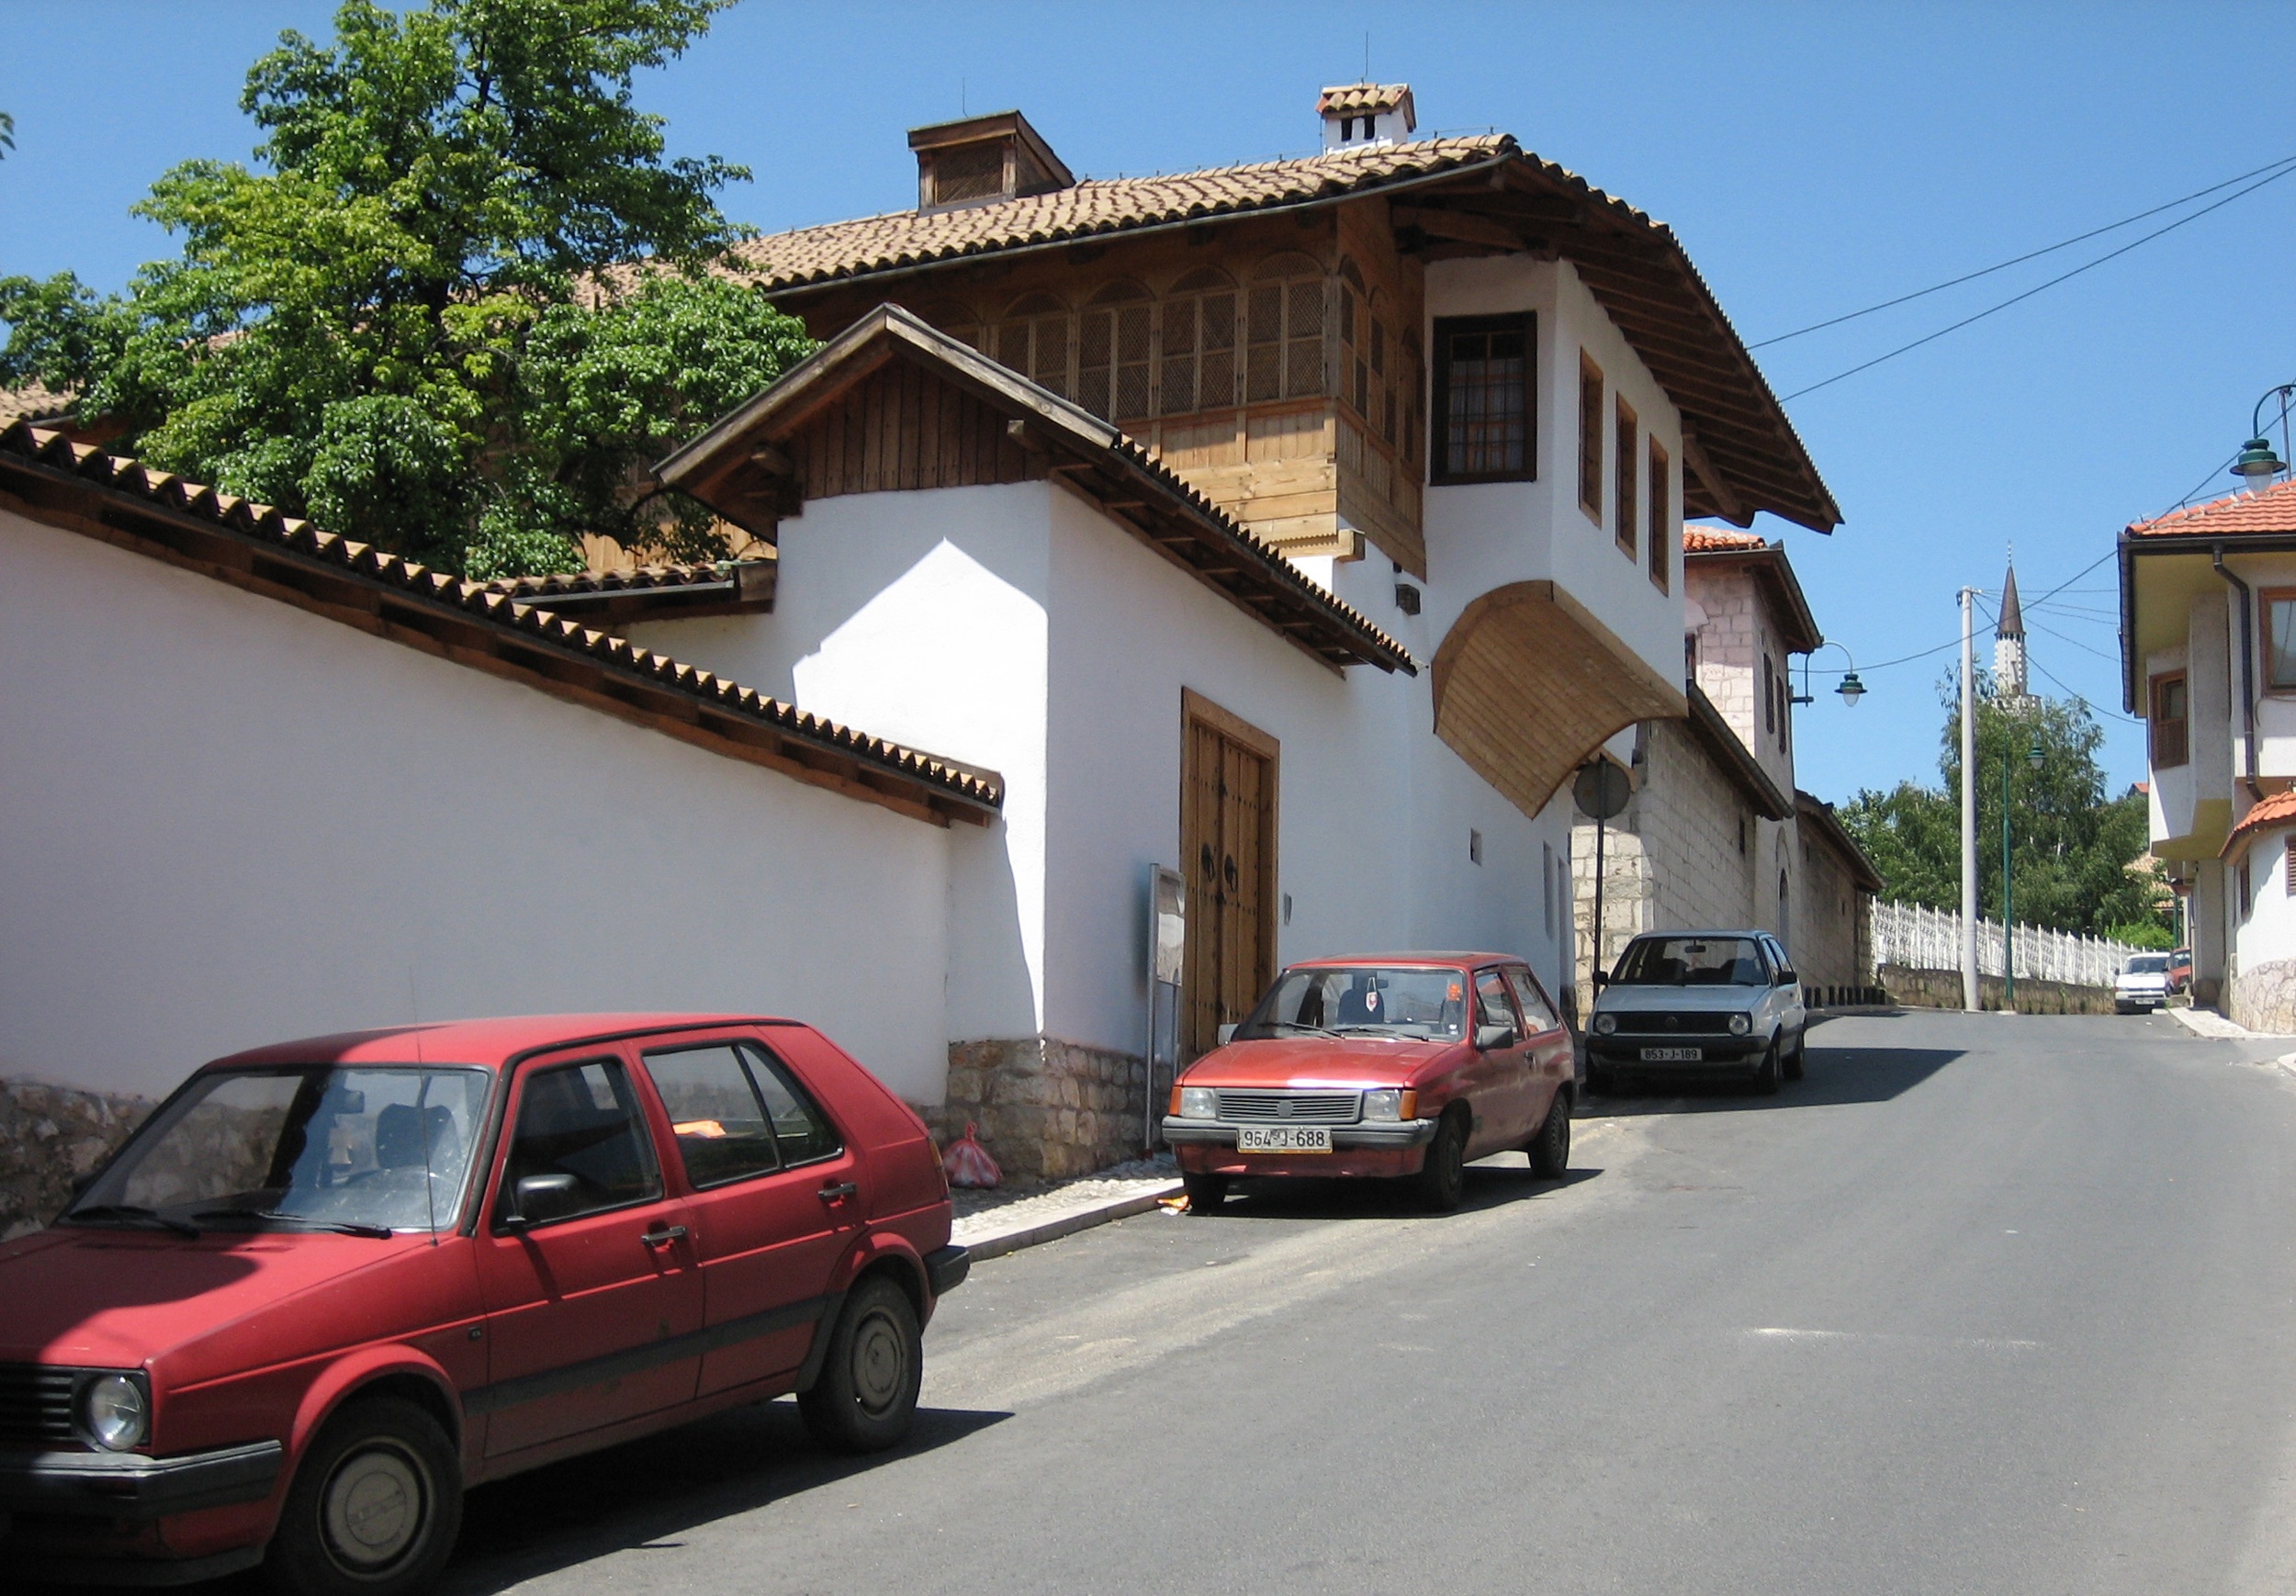 <p>The Alija Djerzeleza kuća was constructed in the 17th century and includes two walled courtyards close to the structure as well as a large orchard that extends to the south and west. The northern wall of the house forms the edge of the street to the north. The house was owned by the Cejvan family for an extended period. Conservation and restoration work began in the late 1990s and more detailed work on structural stabilization and interior and trim work was ongoing in 2004. The work was overseen by the Cantonal Institute for the Protection of Cultural, Historical, and Natural Heritage of Sarajevo.</p>